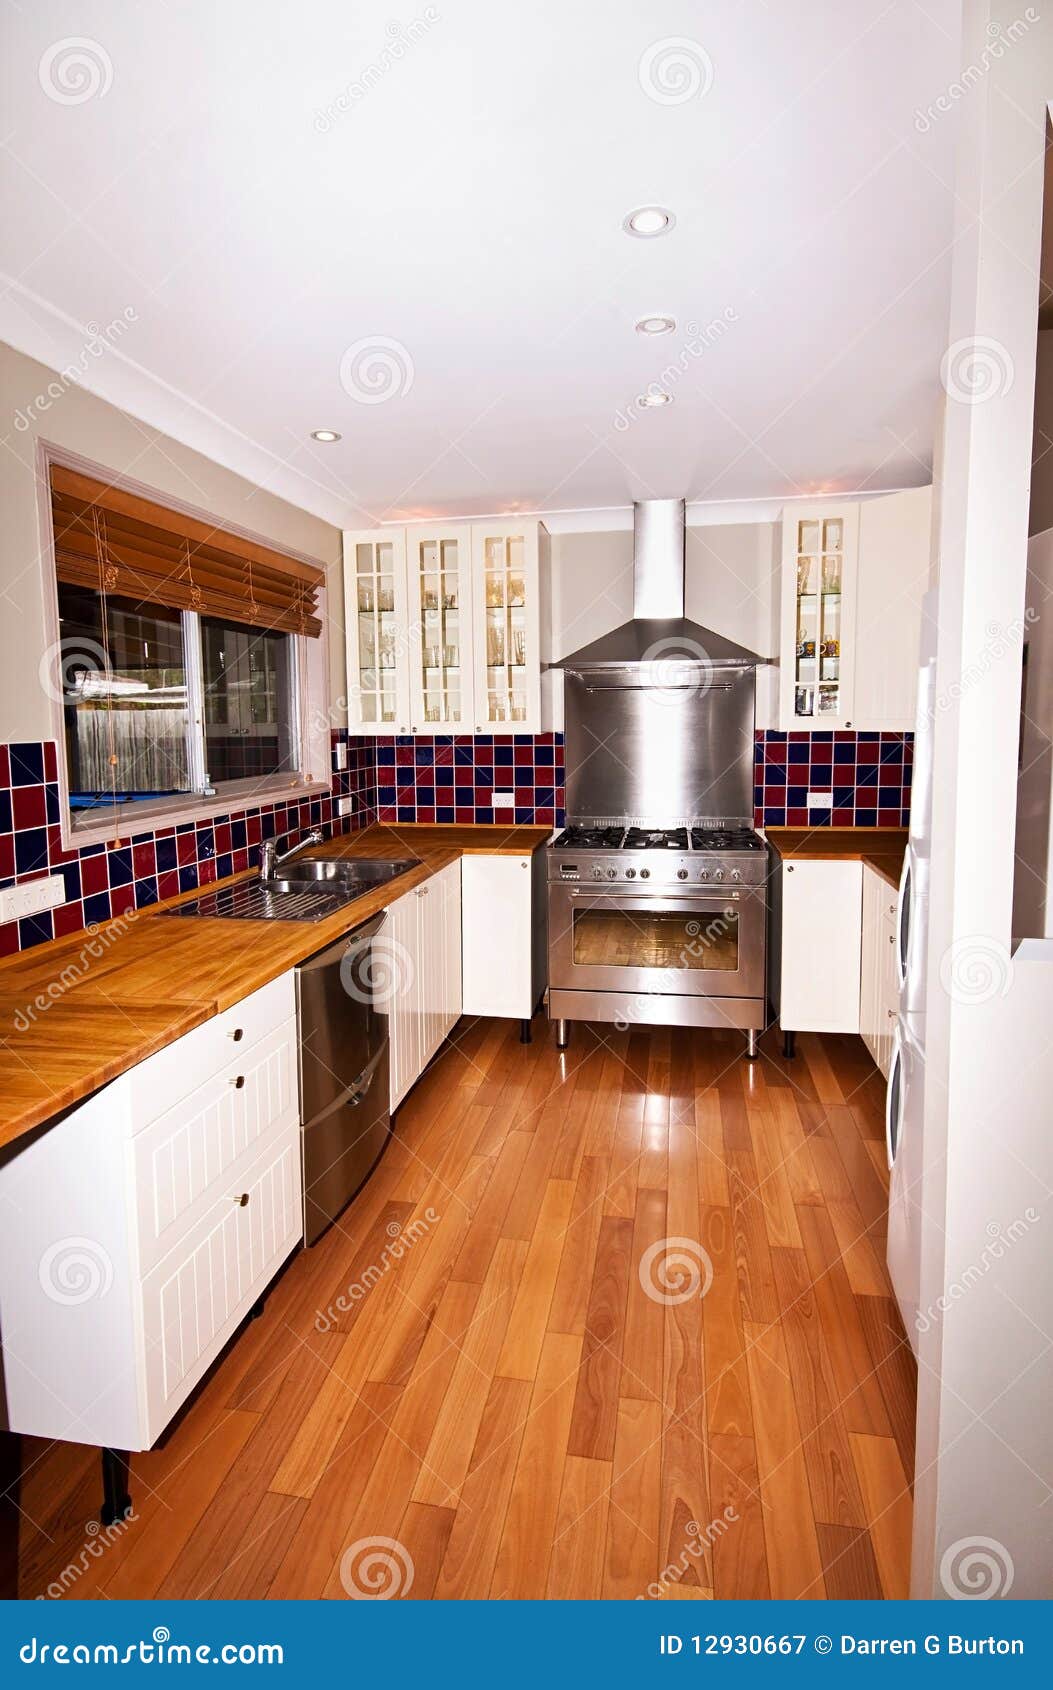 Modern Kitchen With Gas Stove Royalty Free Stock Photography - Image ...